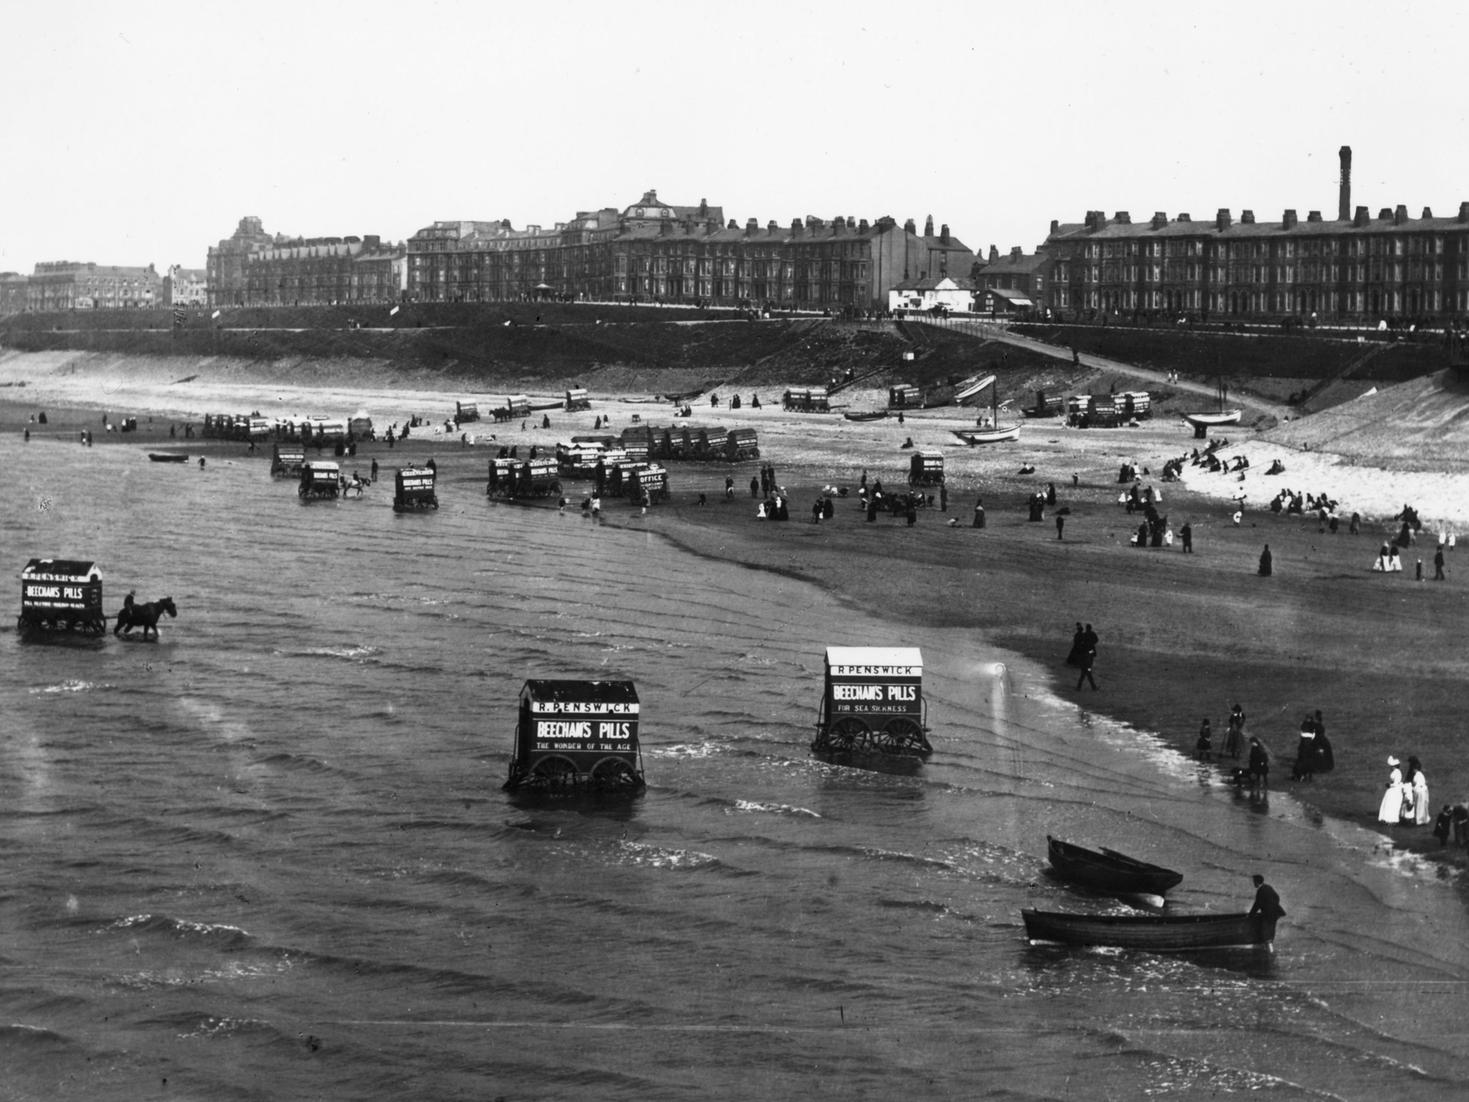 The beach at Blackpool before the tower was even built, 1880